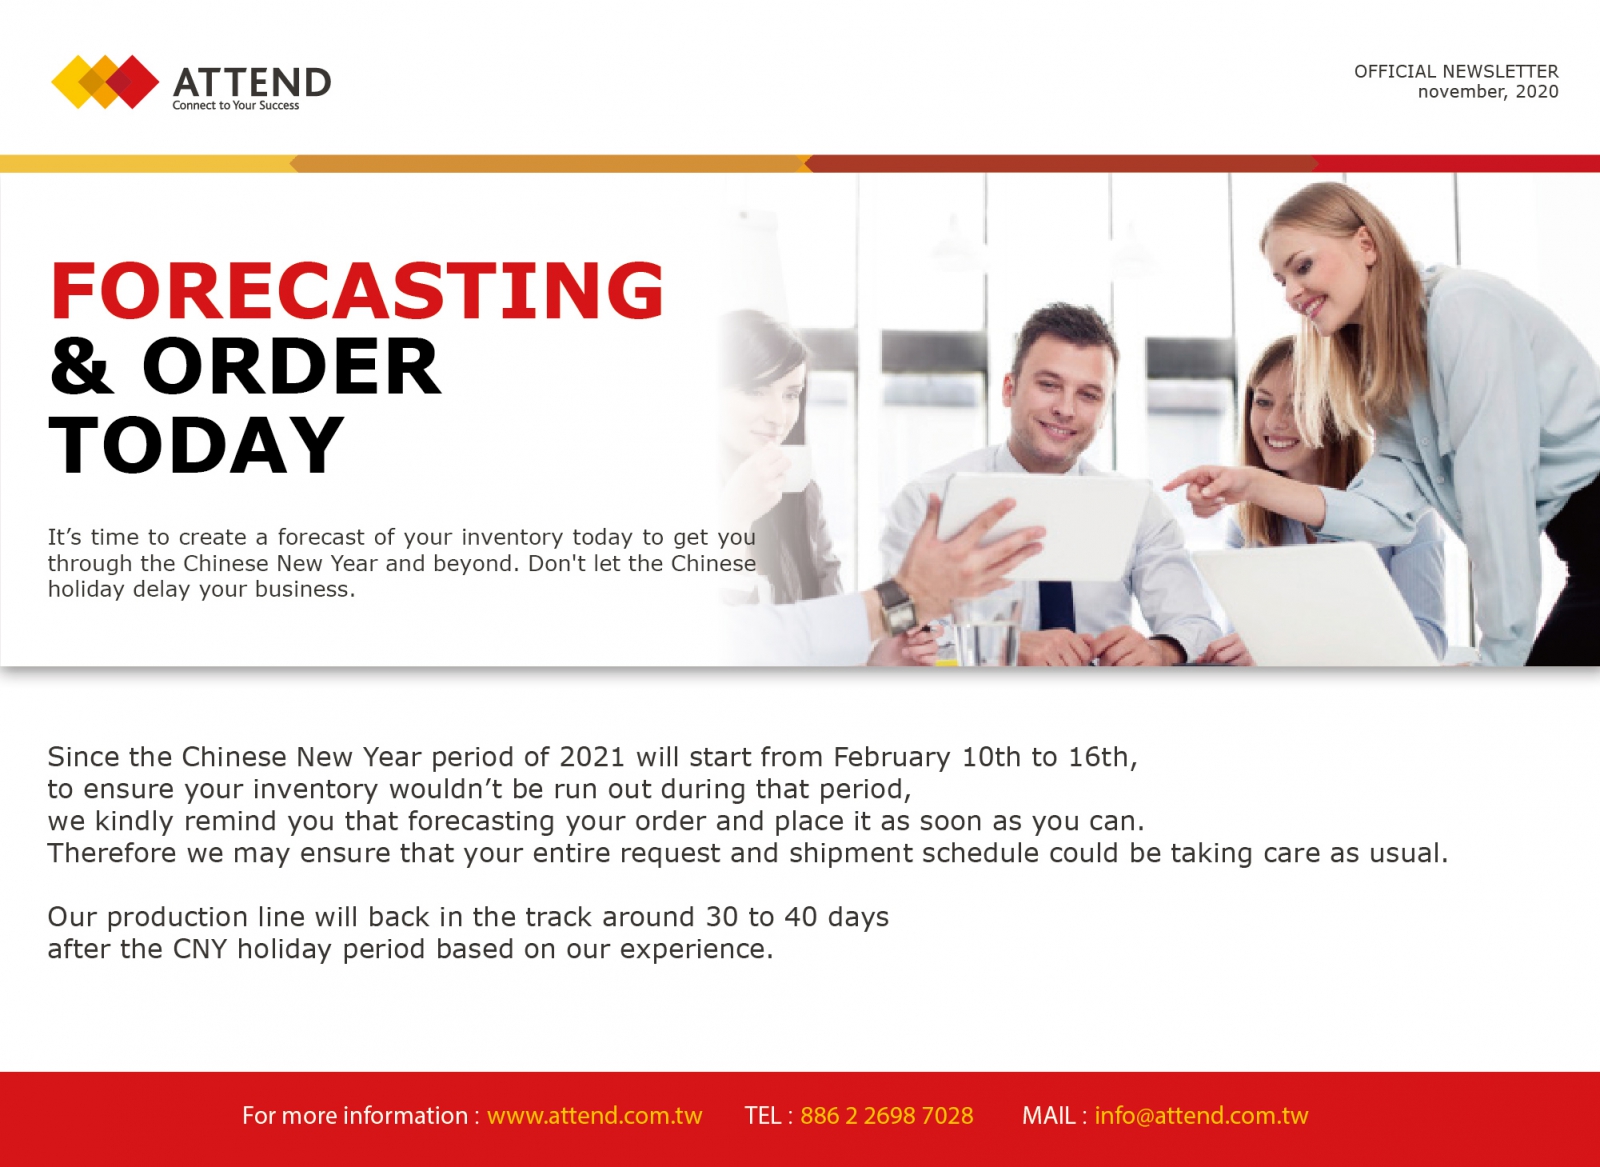 Forecasting & order today